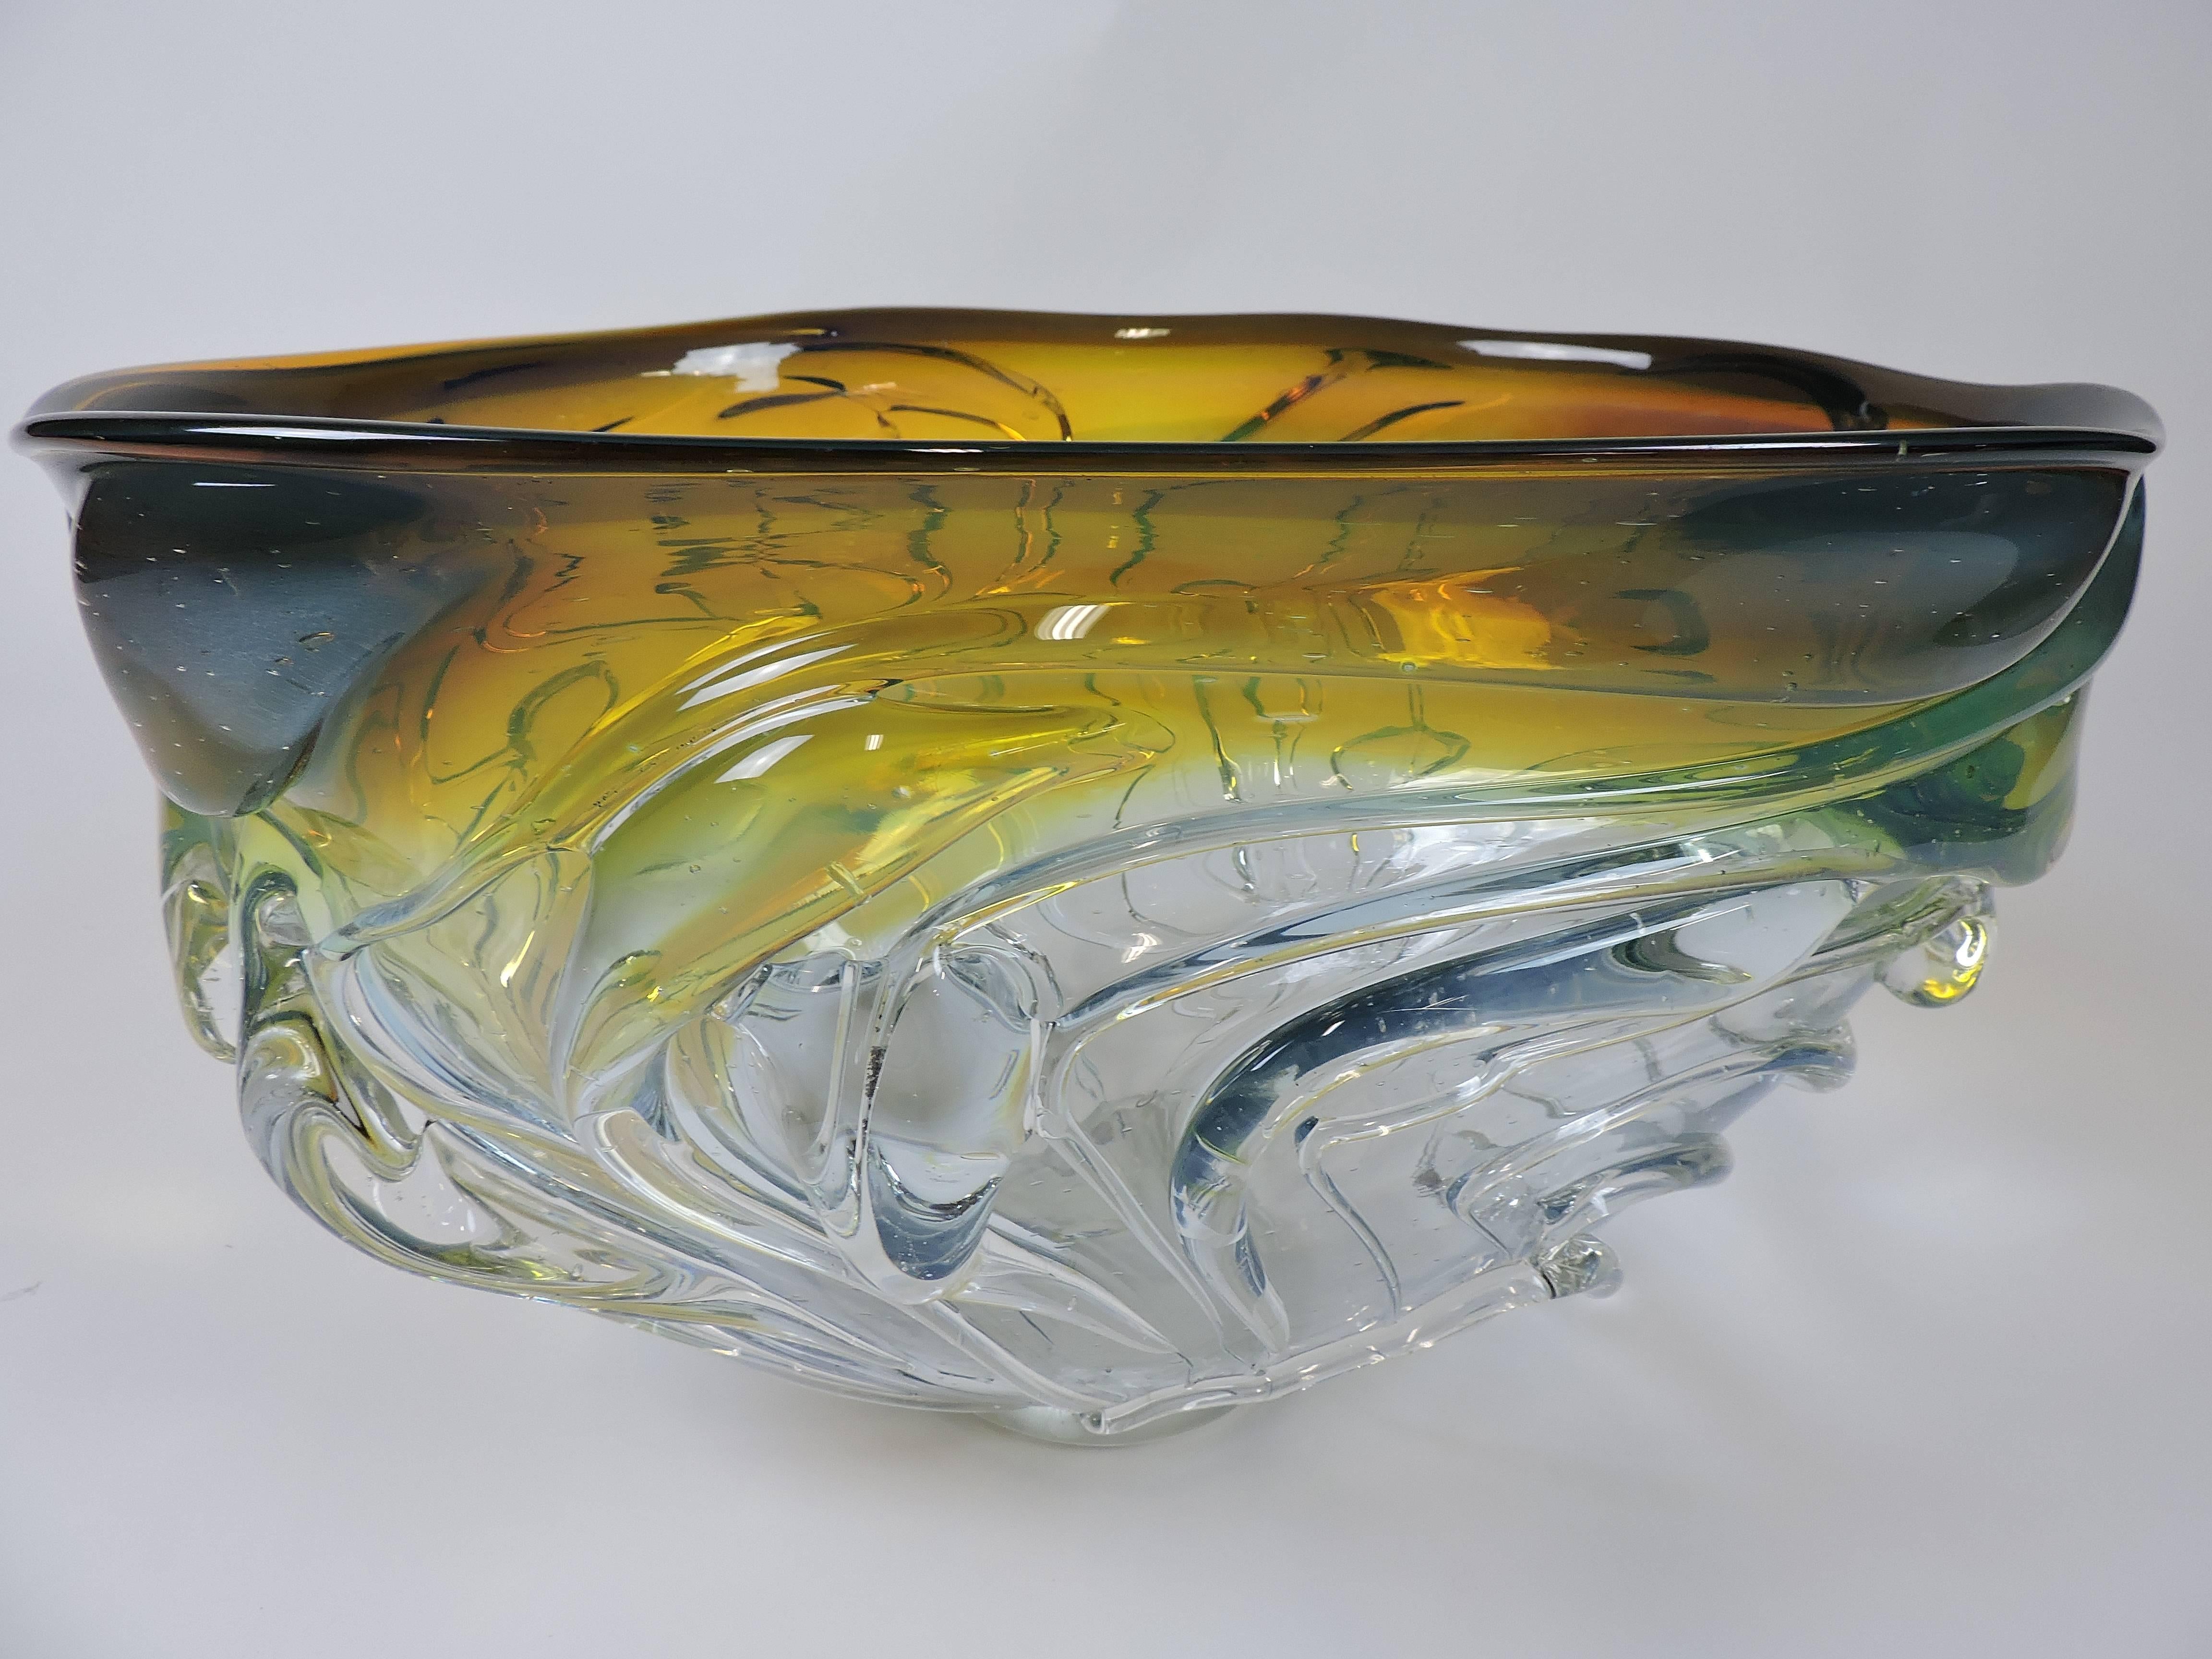 Monumental Art Glass Hand Blown Drip Bowl by Will Dexter In Excellent Condition For Sale In Chesterfield, NJ